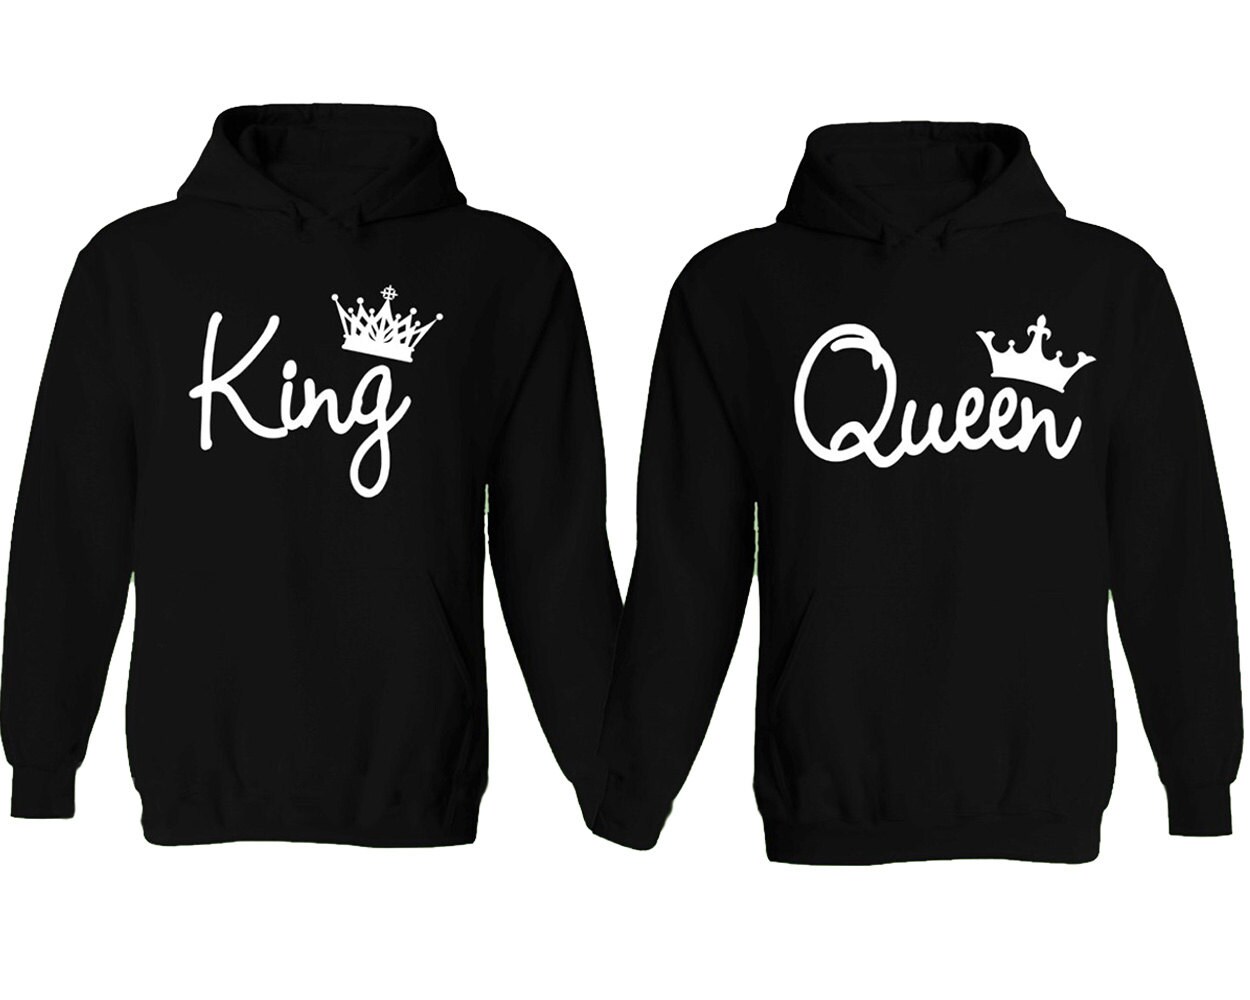  King  and Queen  Soul Mate Couple sweaters Cartoon Funny Couple